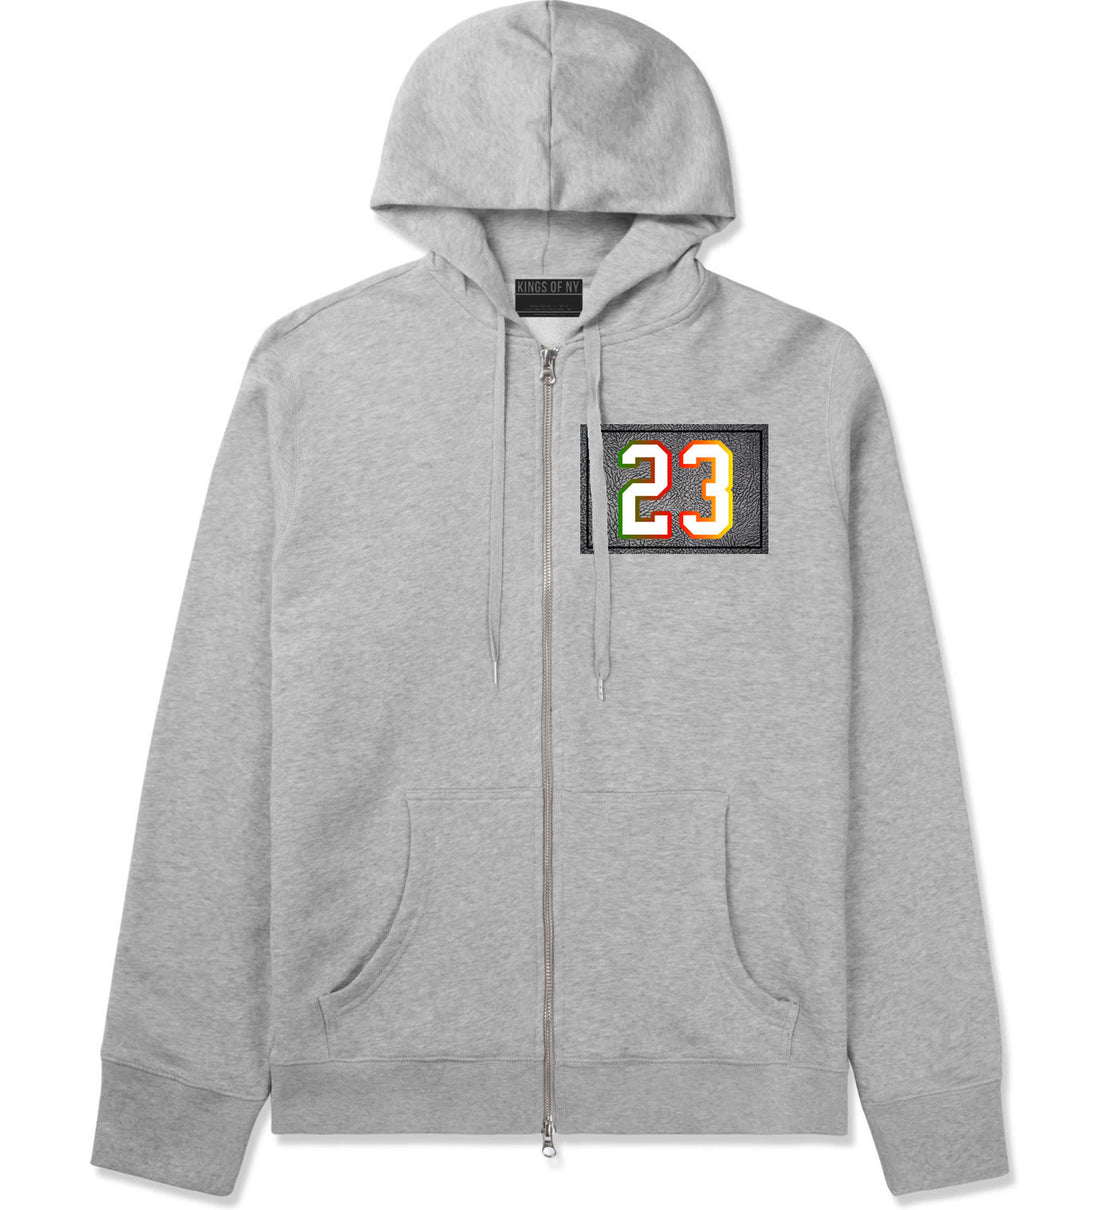 23 Cement Print Colorful Jersey Zip Up Hoodie in Grey By Kings Of NY